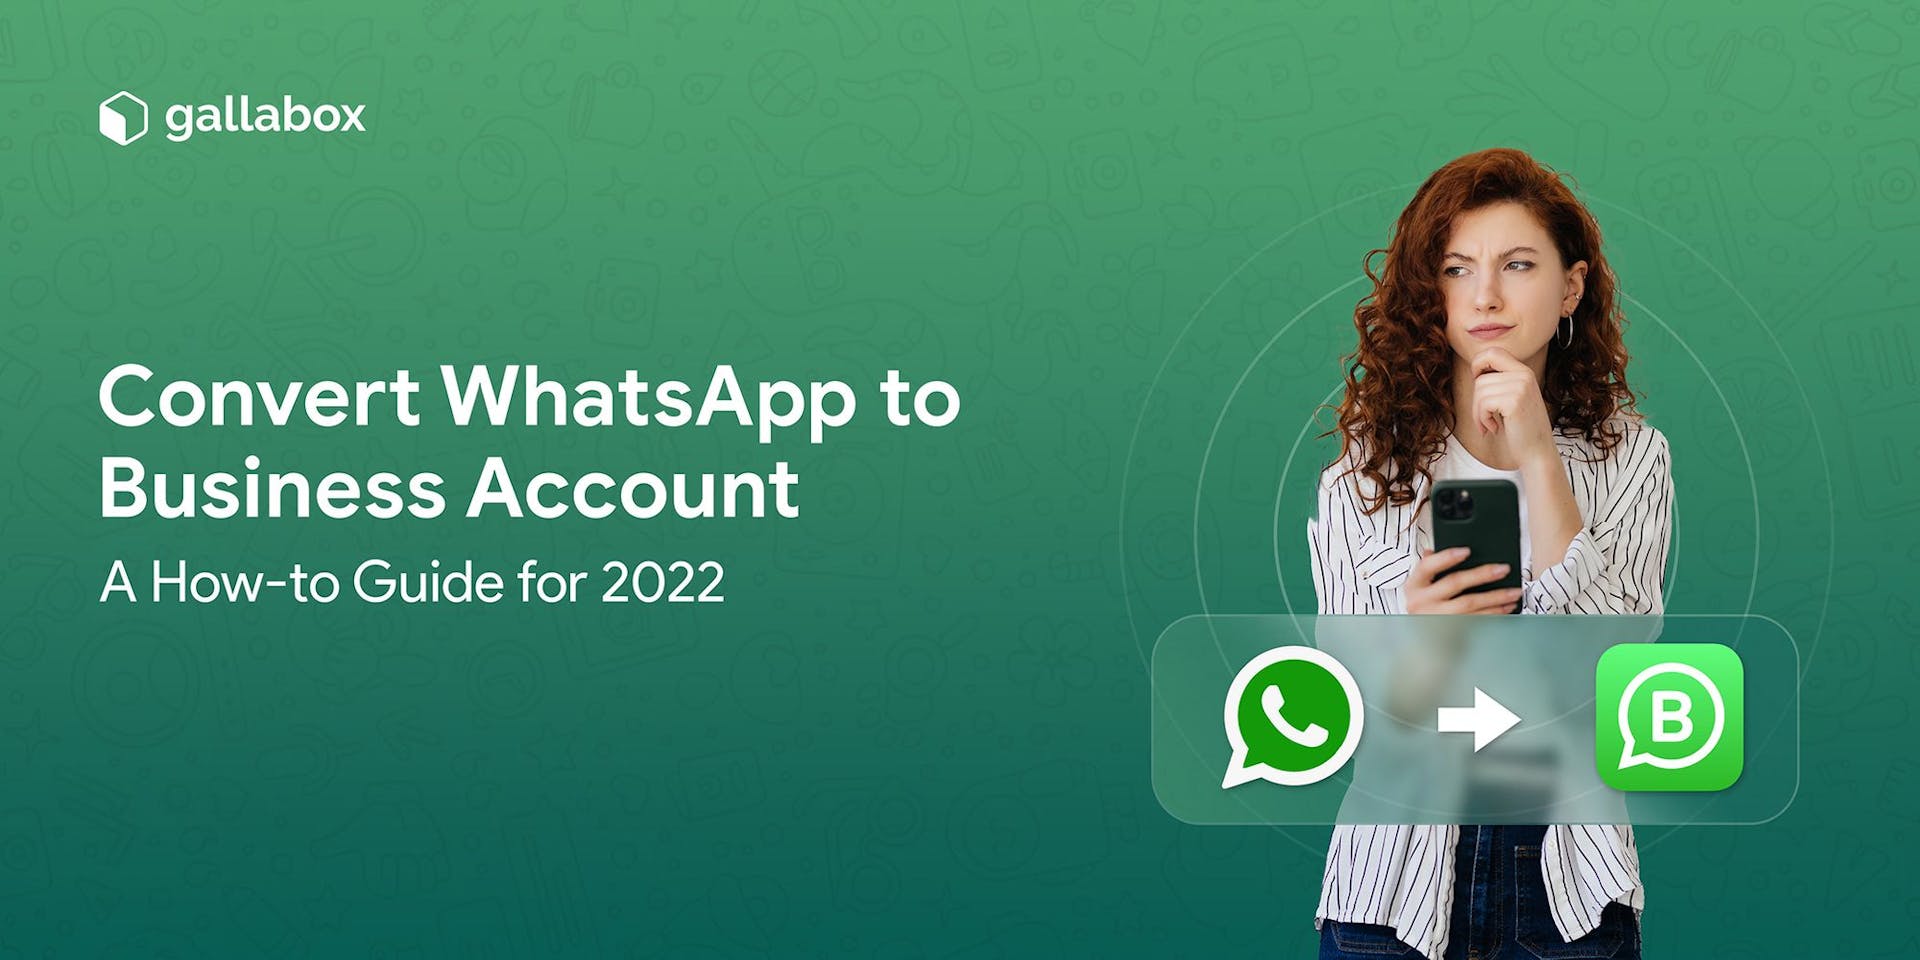 How to Convert WhatsApp to Business Account